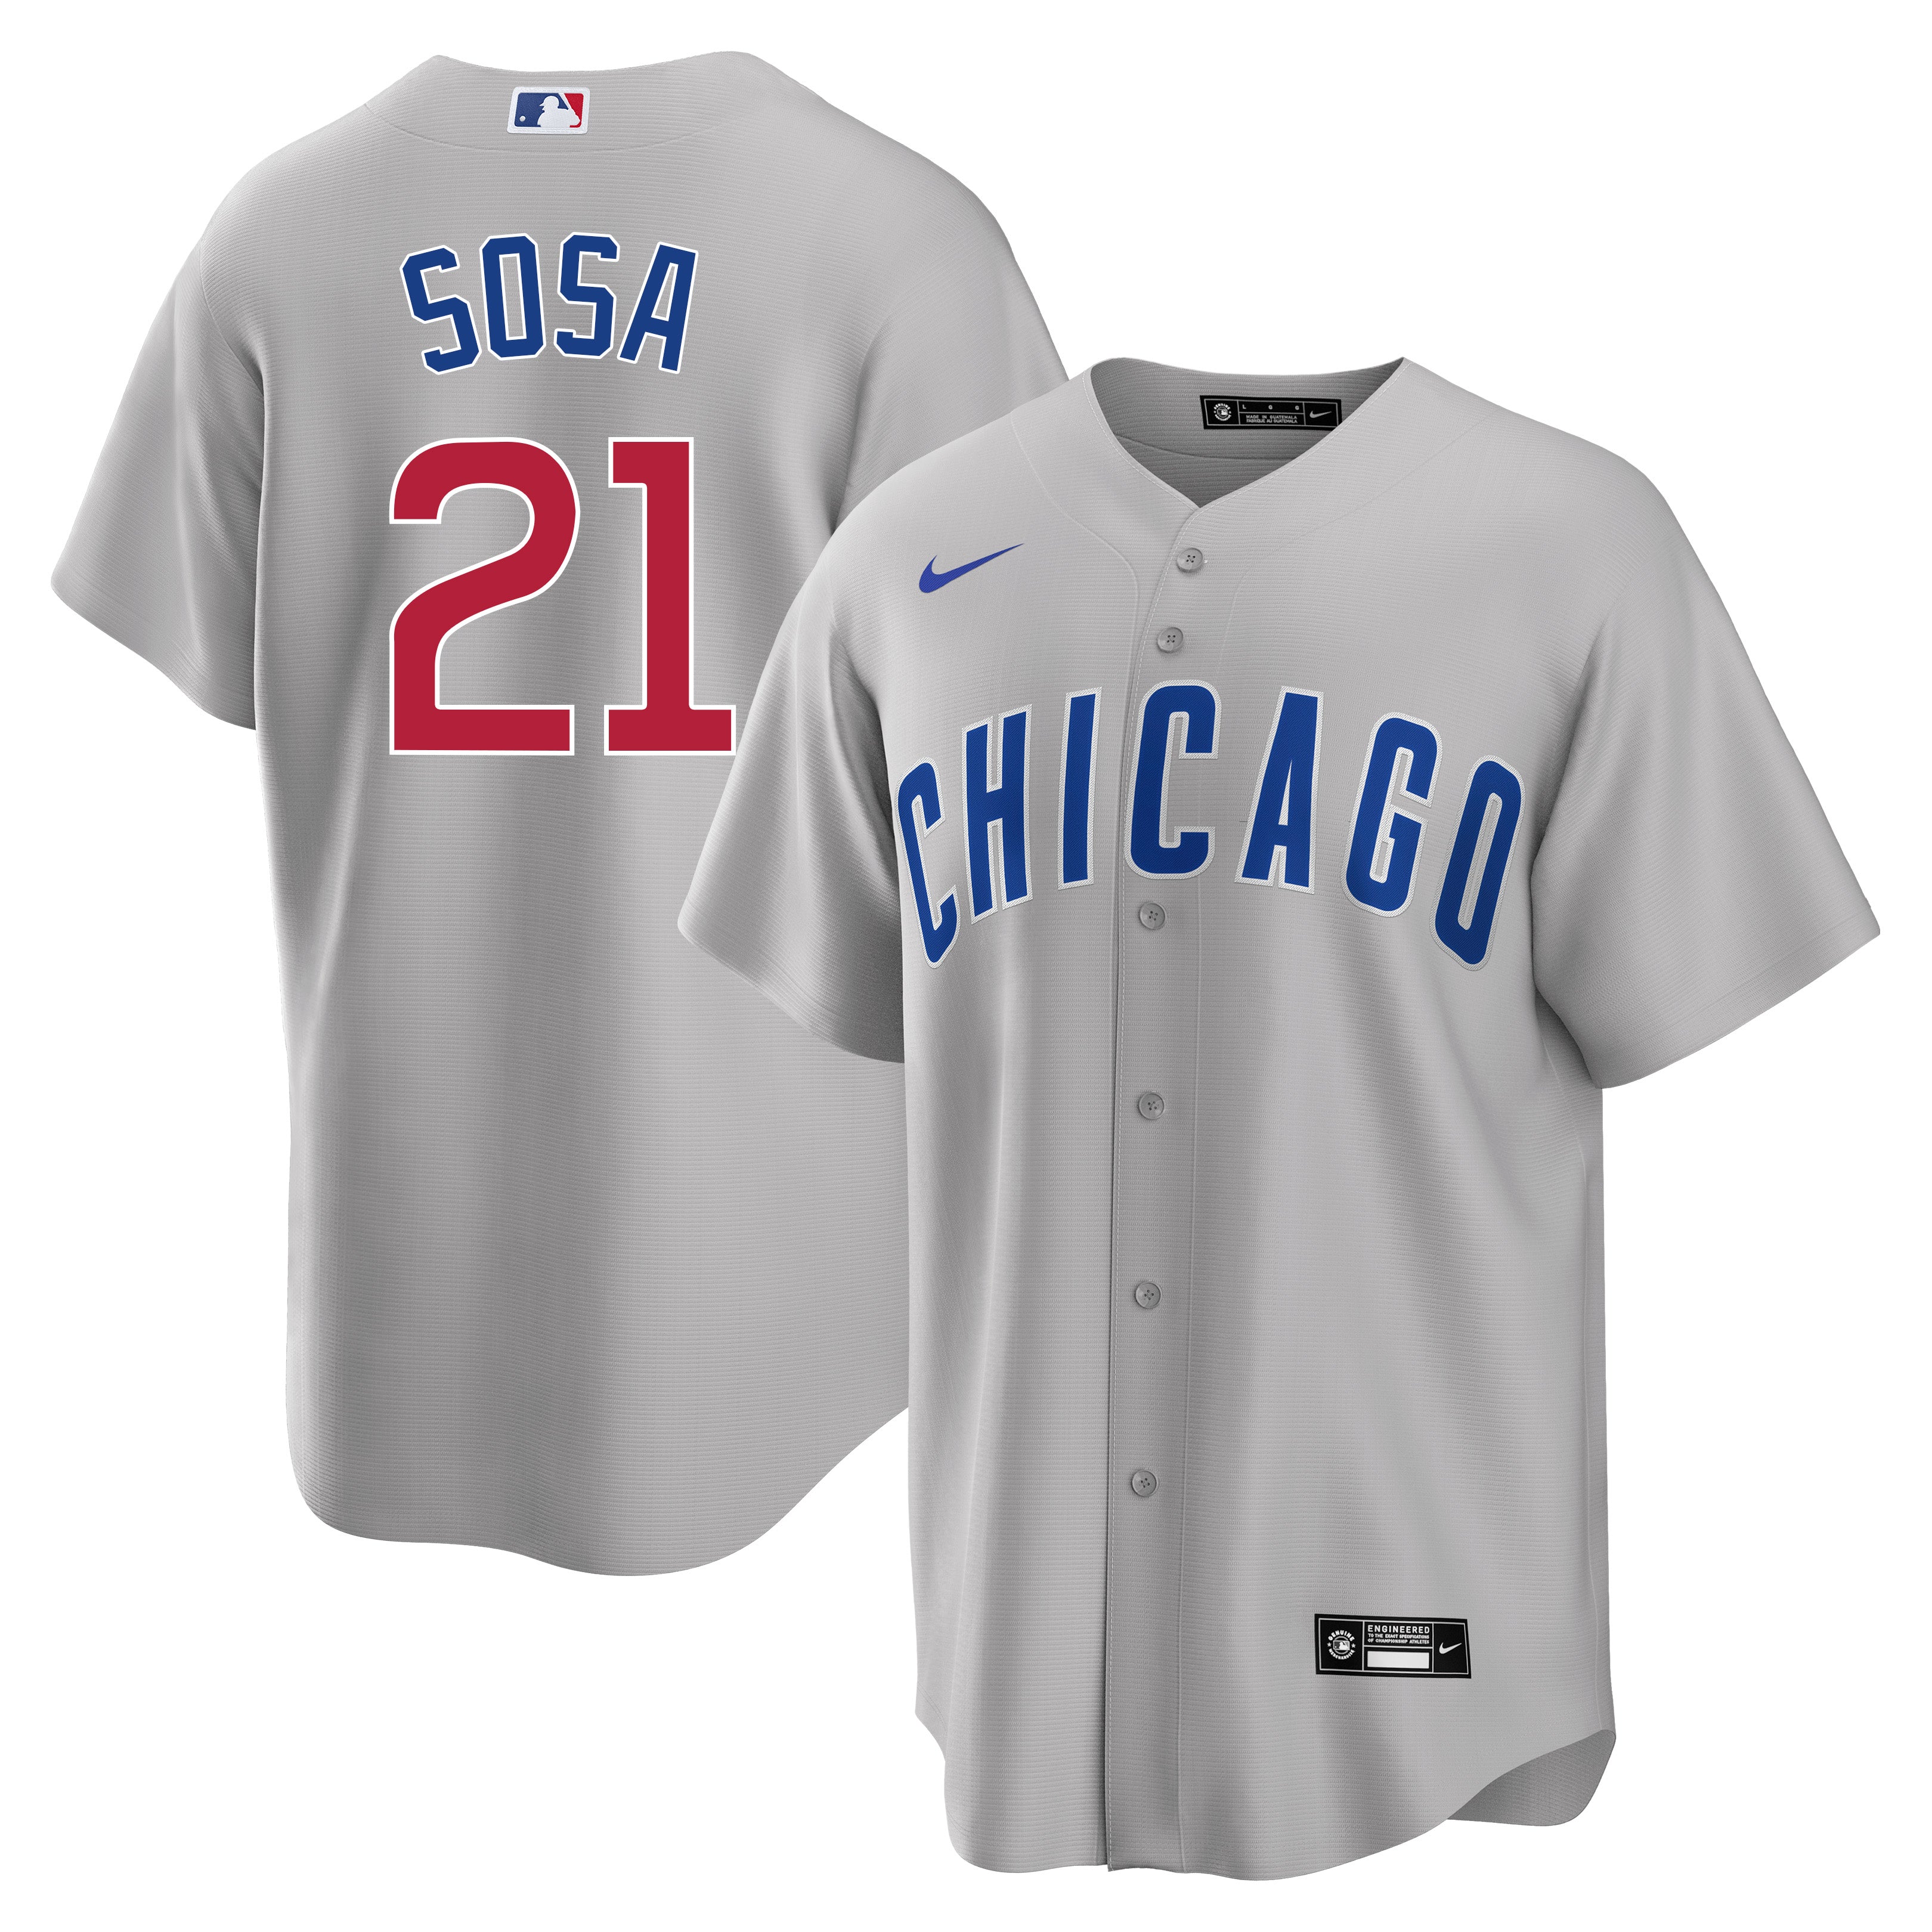 Sammy Sosa Chicago Cubs Autographed Majestic Replica Jersey